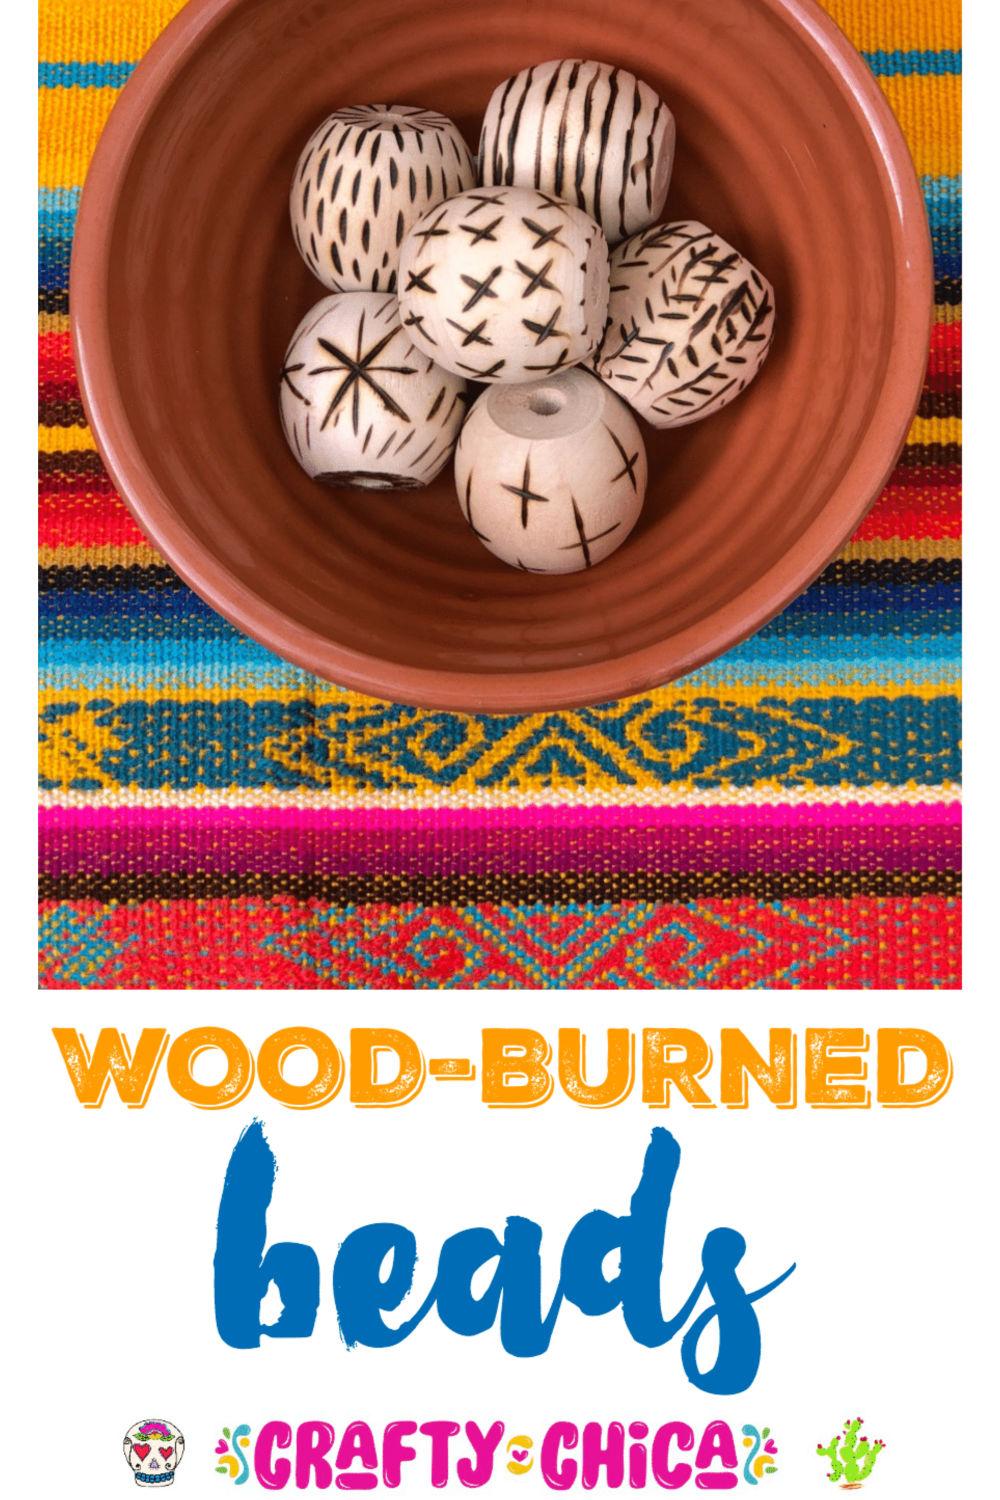 Wood burn your beads, get creative! #craftychica #woodburning